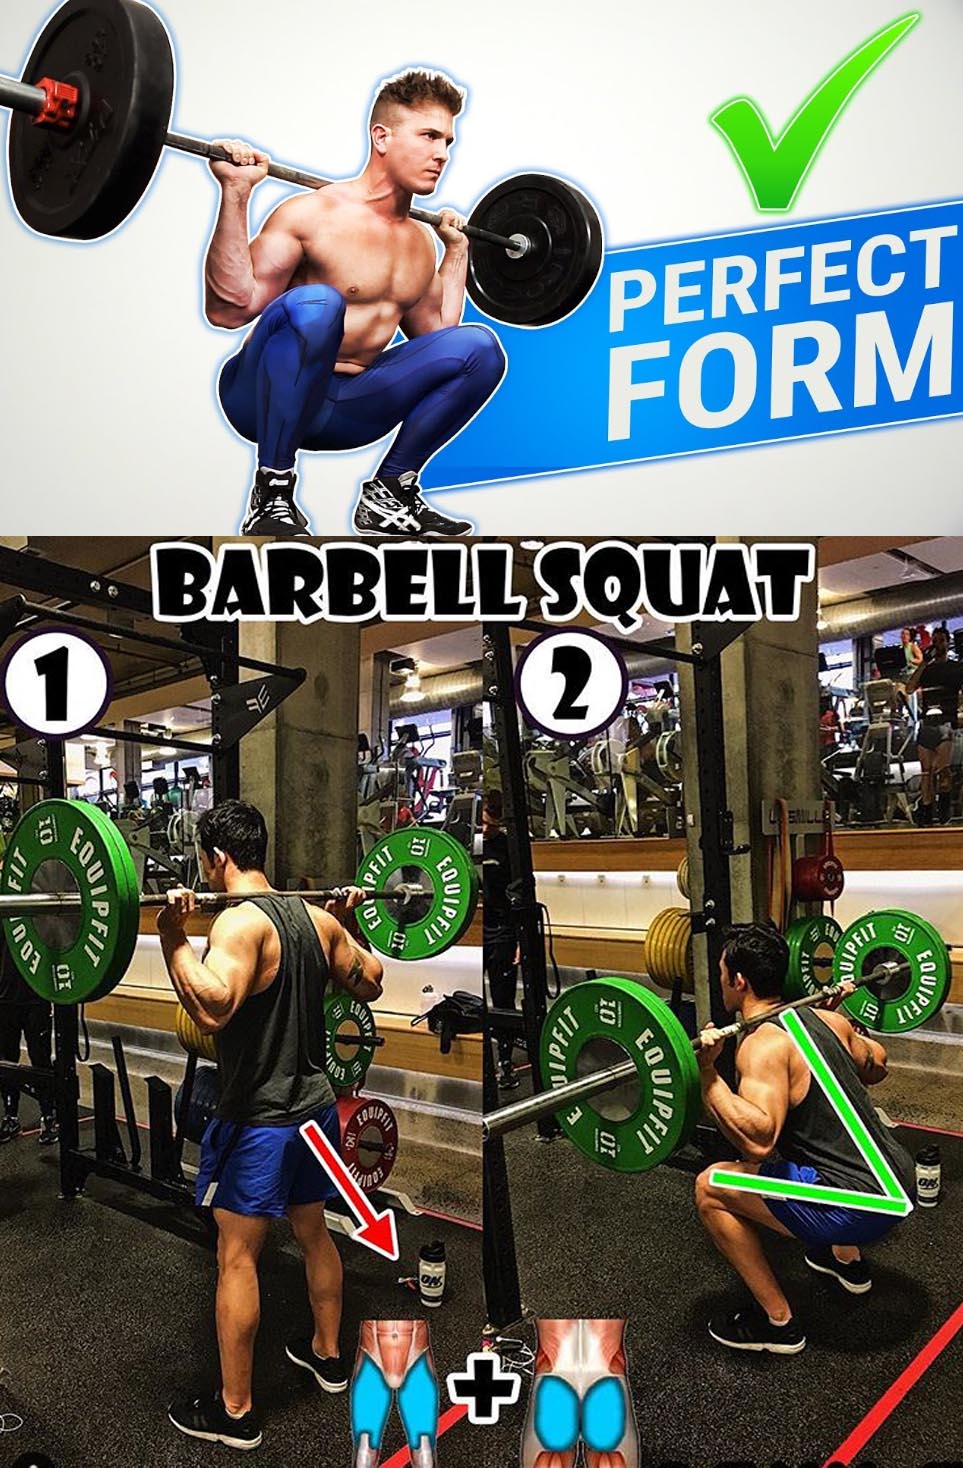 The Barbell Squat